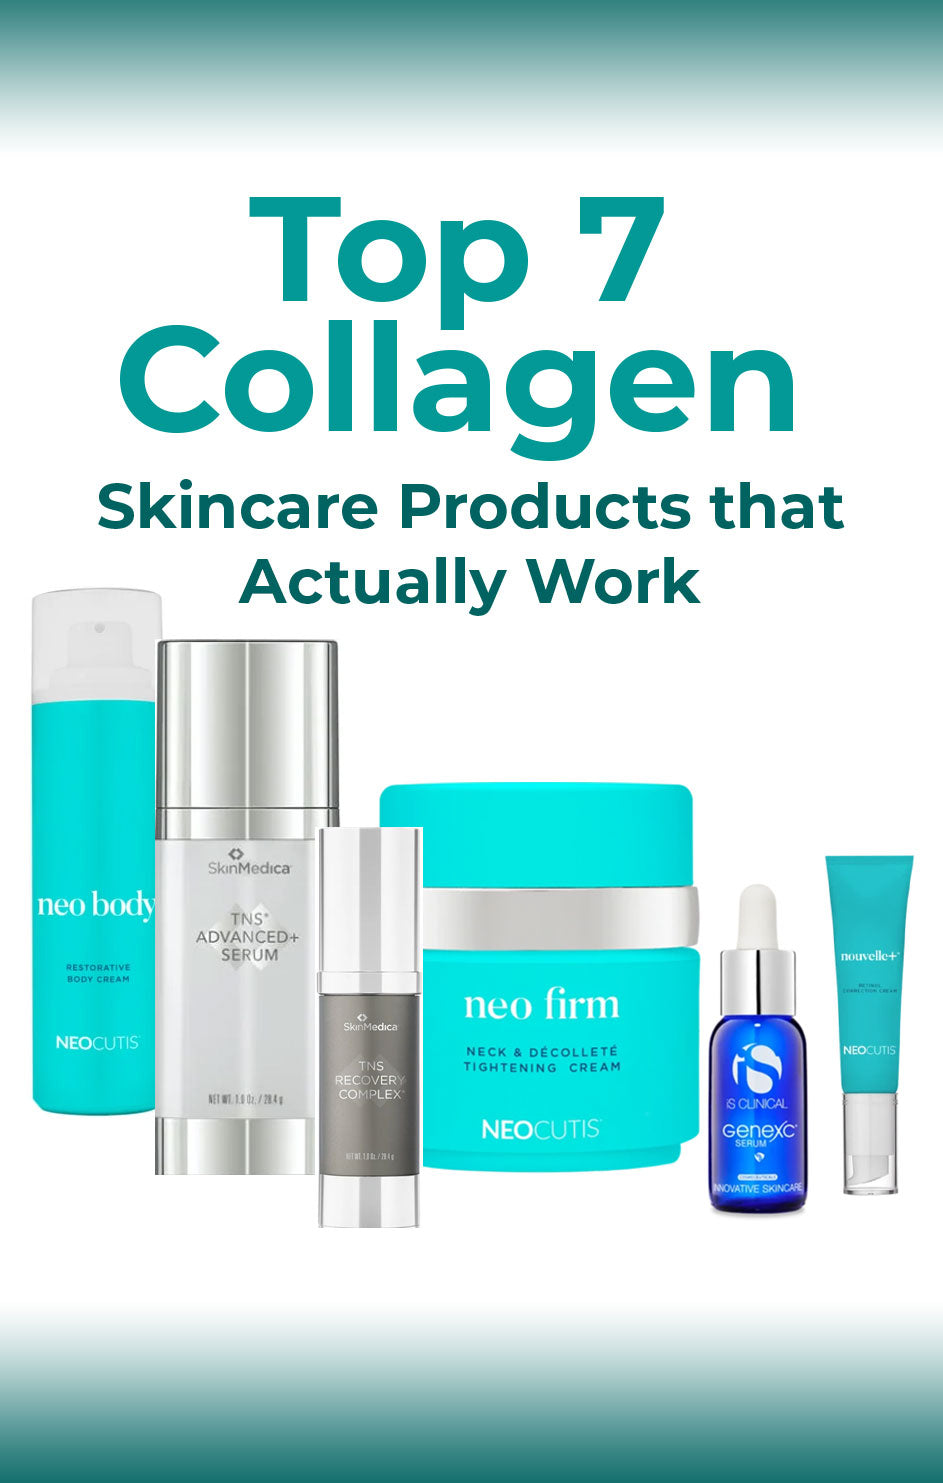 Top 7 Collagen Skincare Products that Actually Work